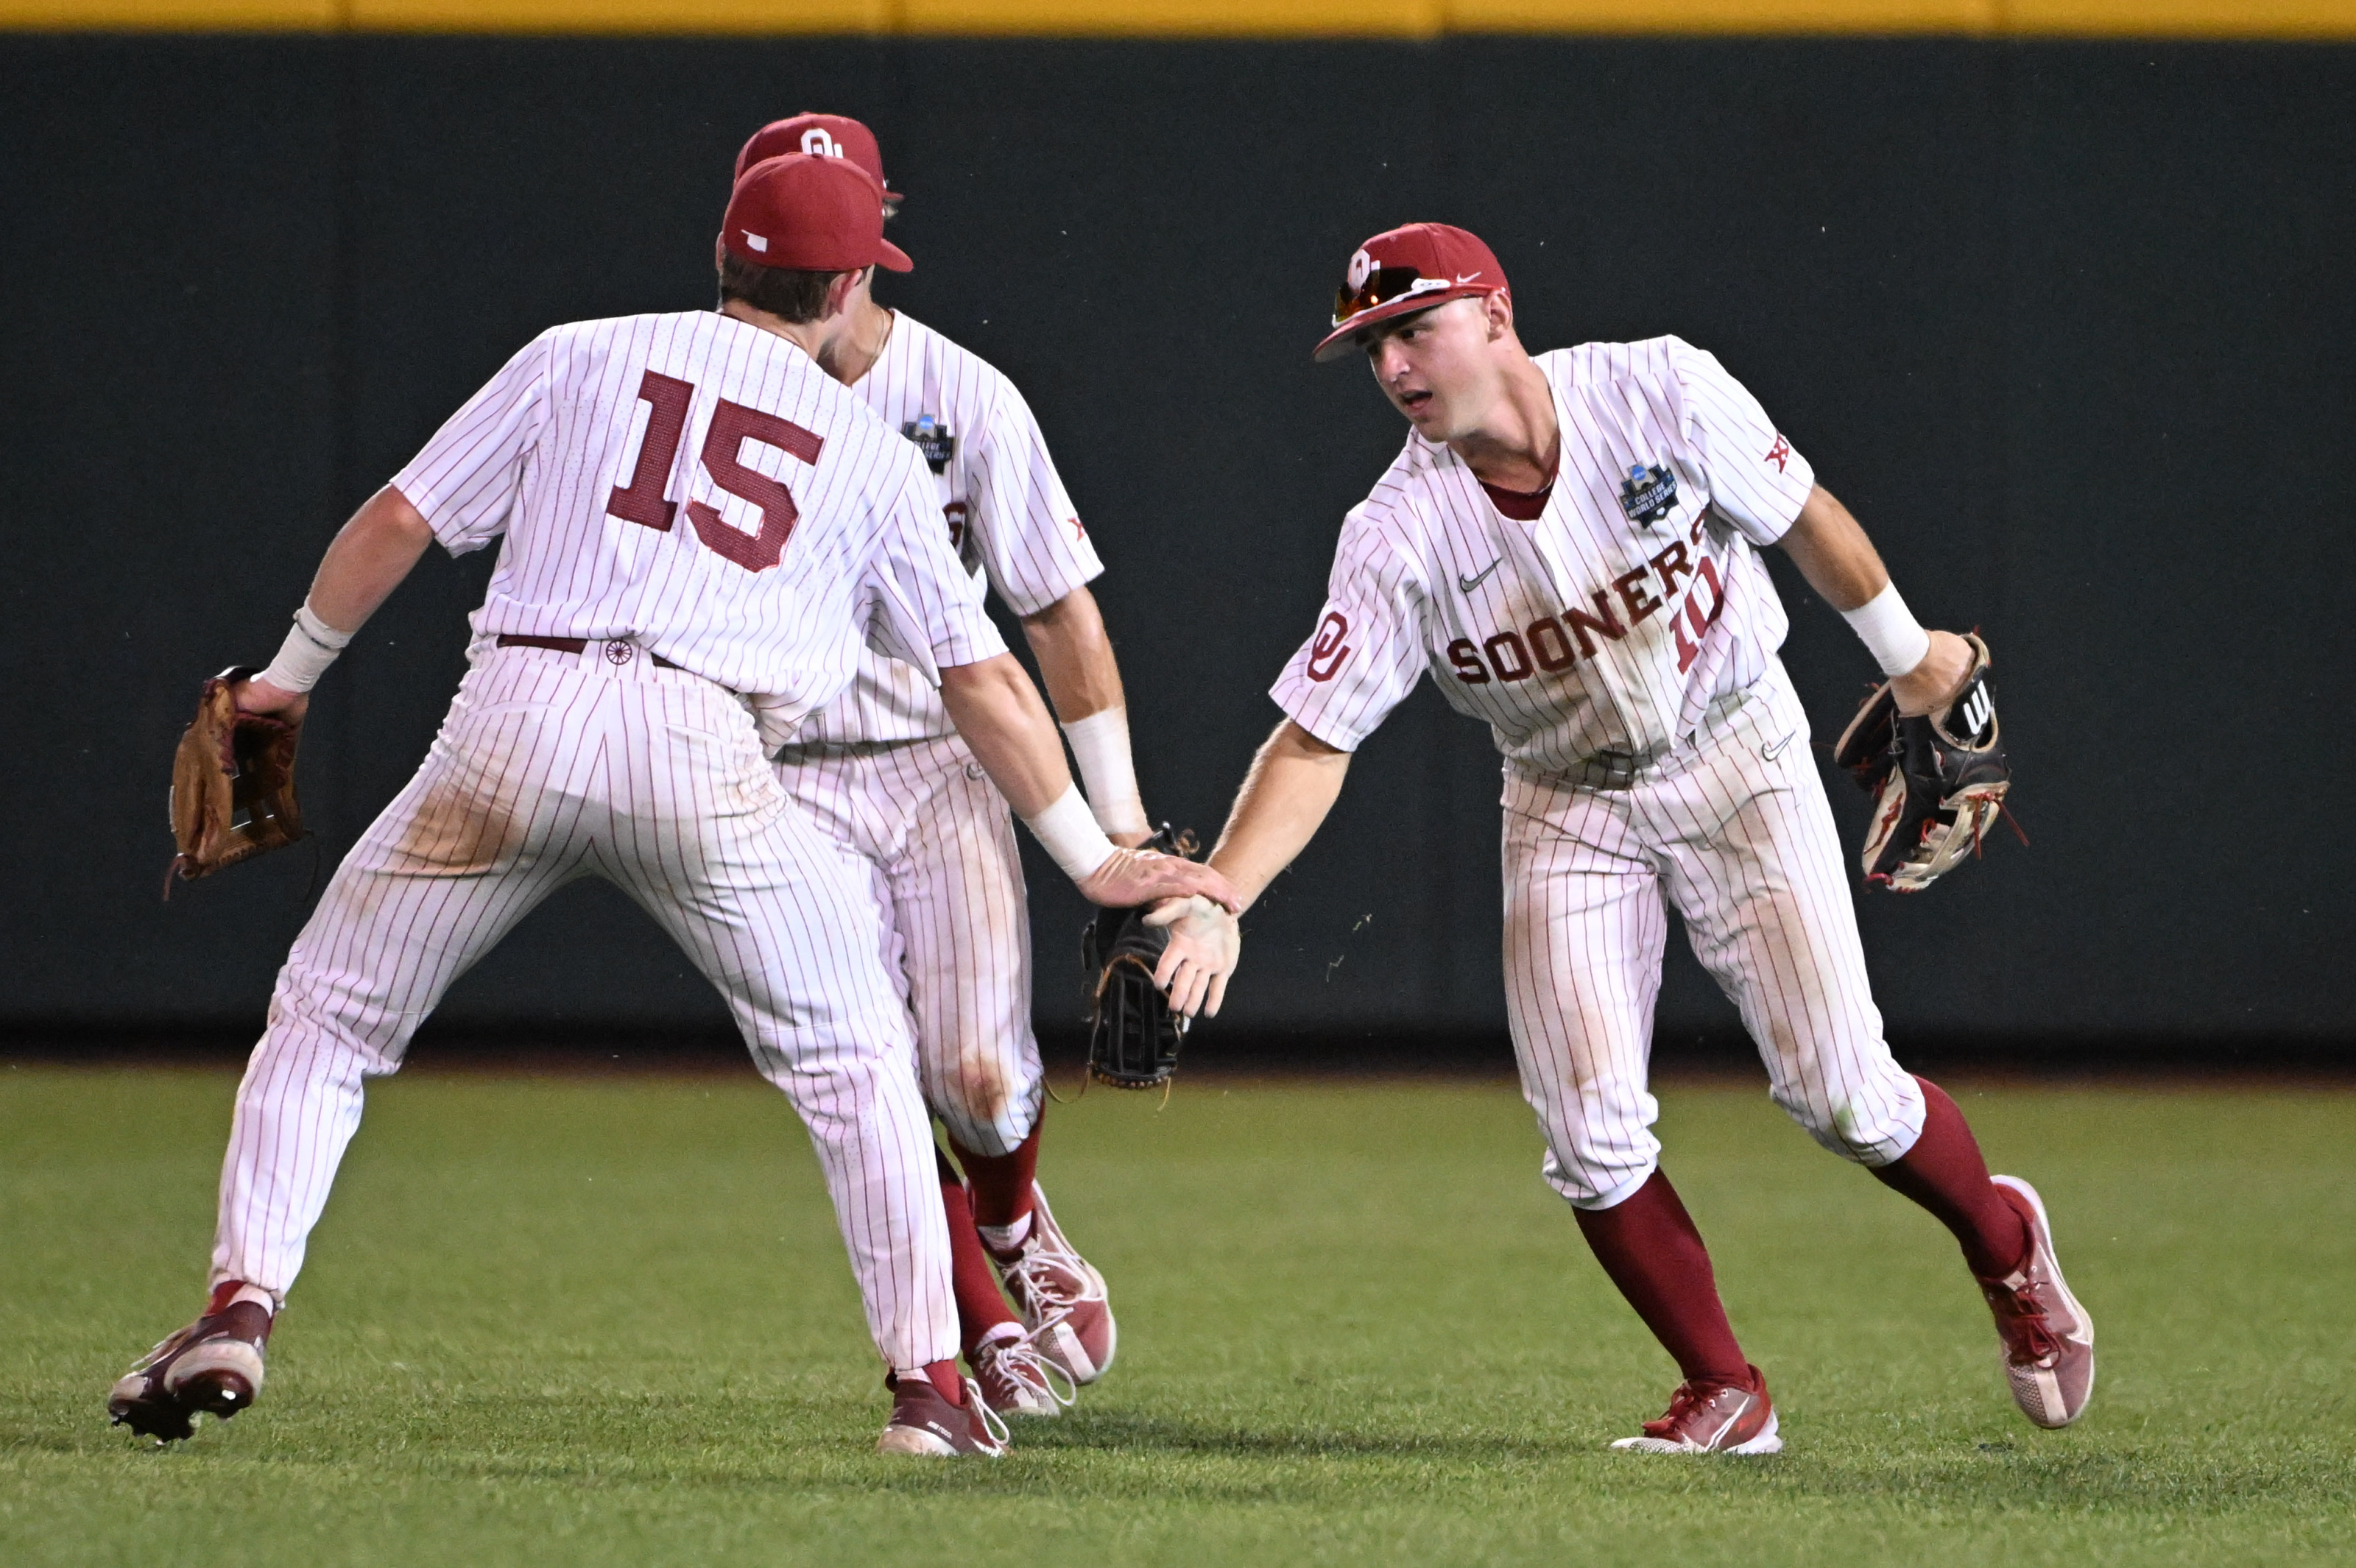 Oklahoma baseball: Young Sooners getting attention of college